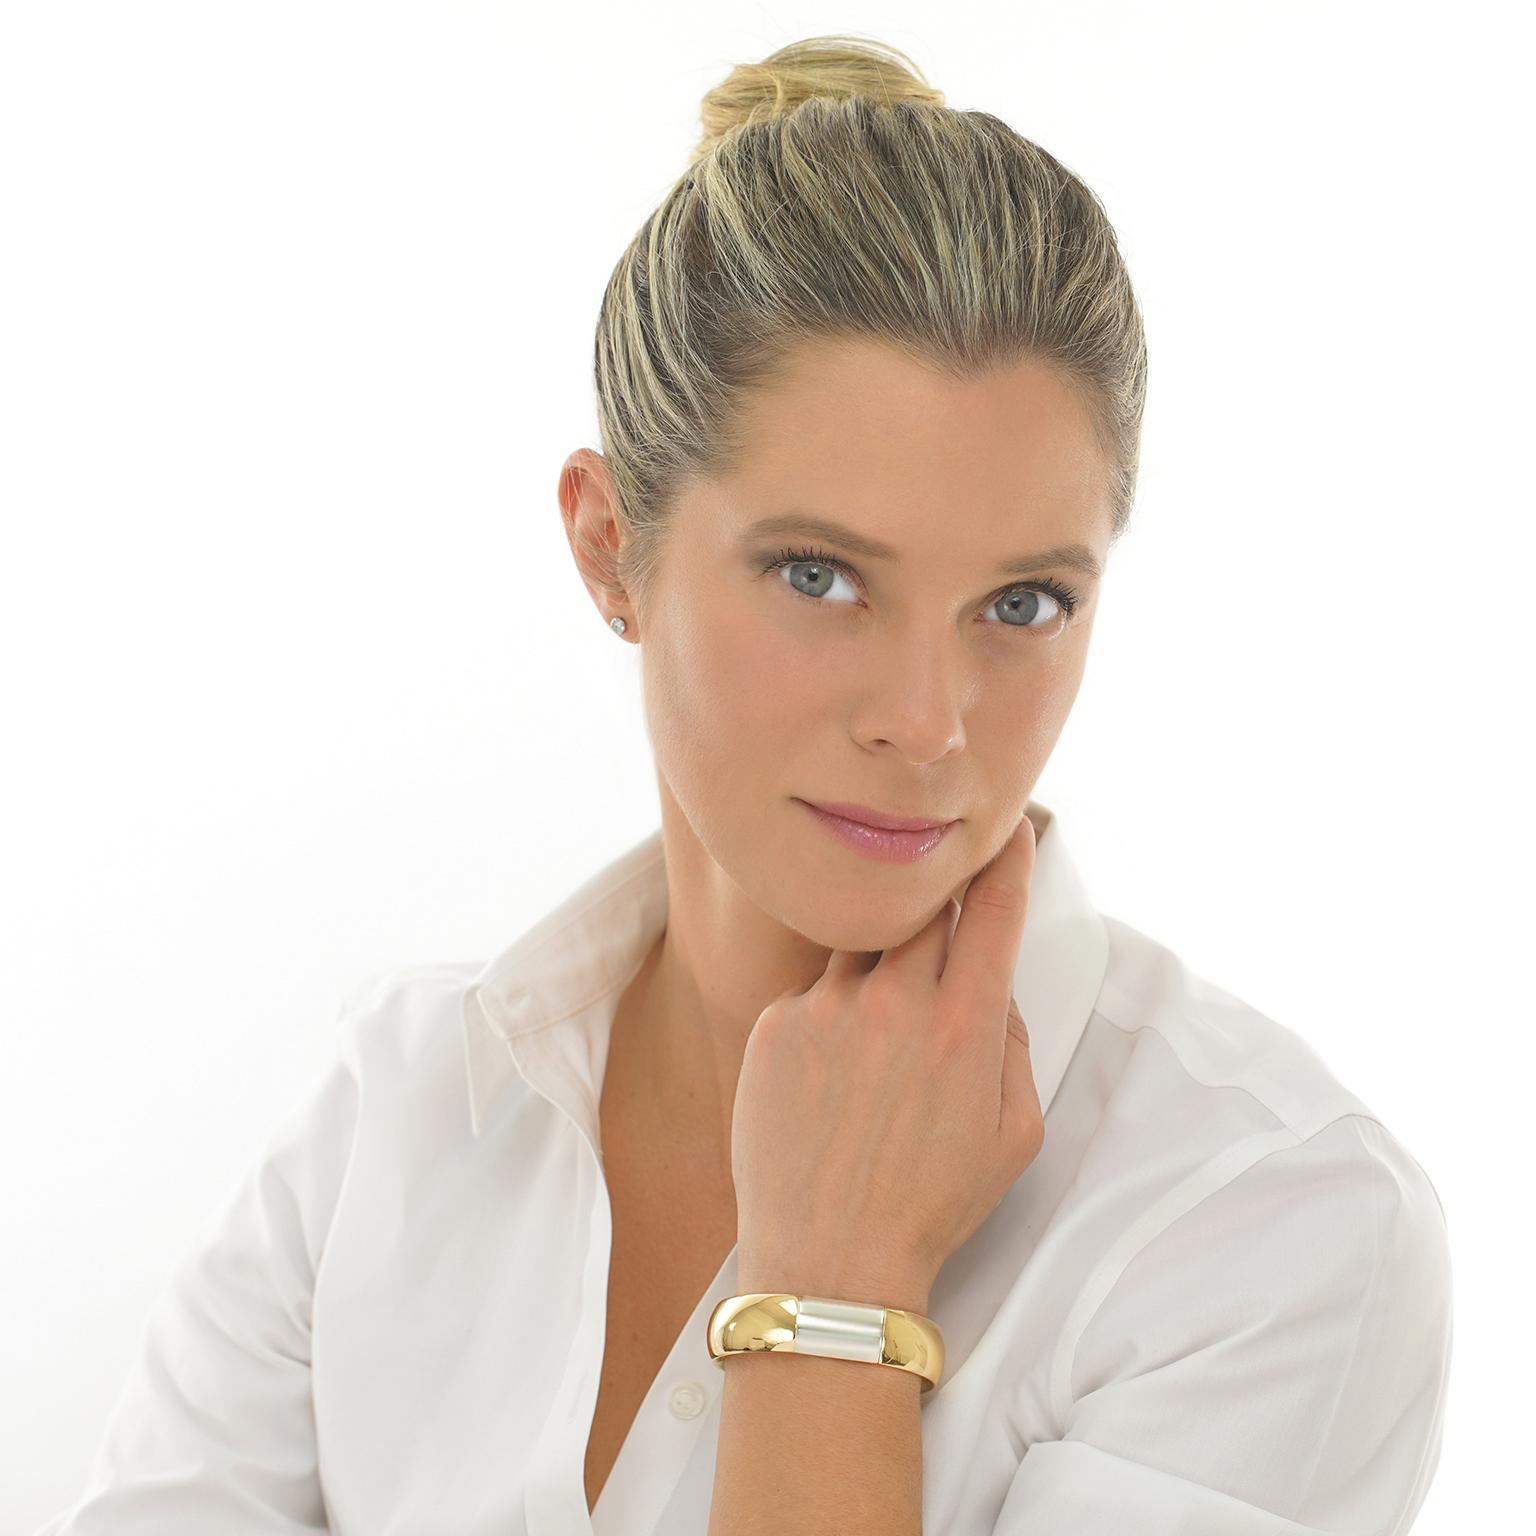 Circa 2000, 18k, by Pomellato, Italy. This ultra-chic Pomellato bracelet epitomizes effortless Italian style. Yellow gold curved elements are punctuated with sleek white gold panels creating visual tension underscored by physical balance. Expertly